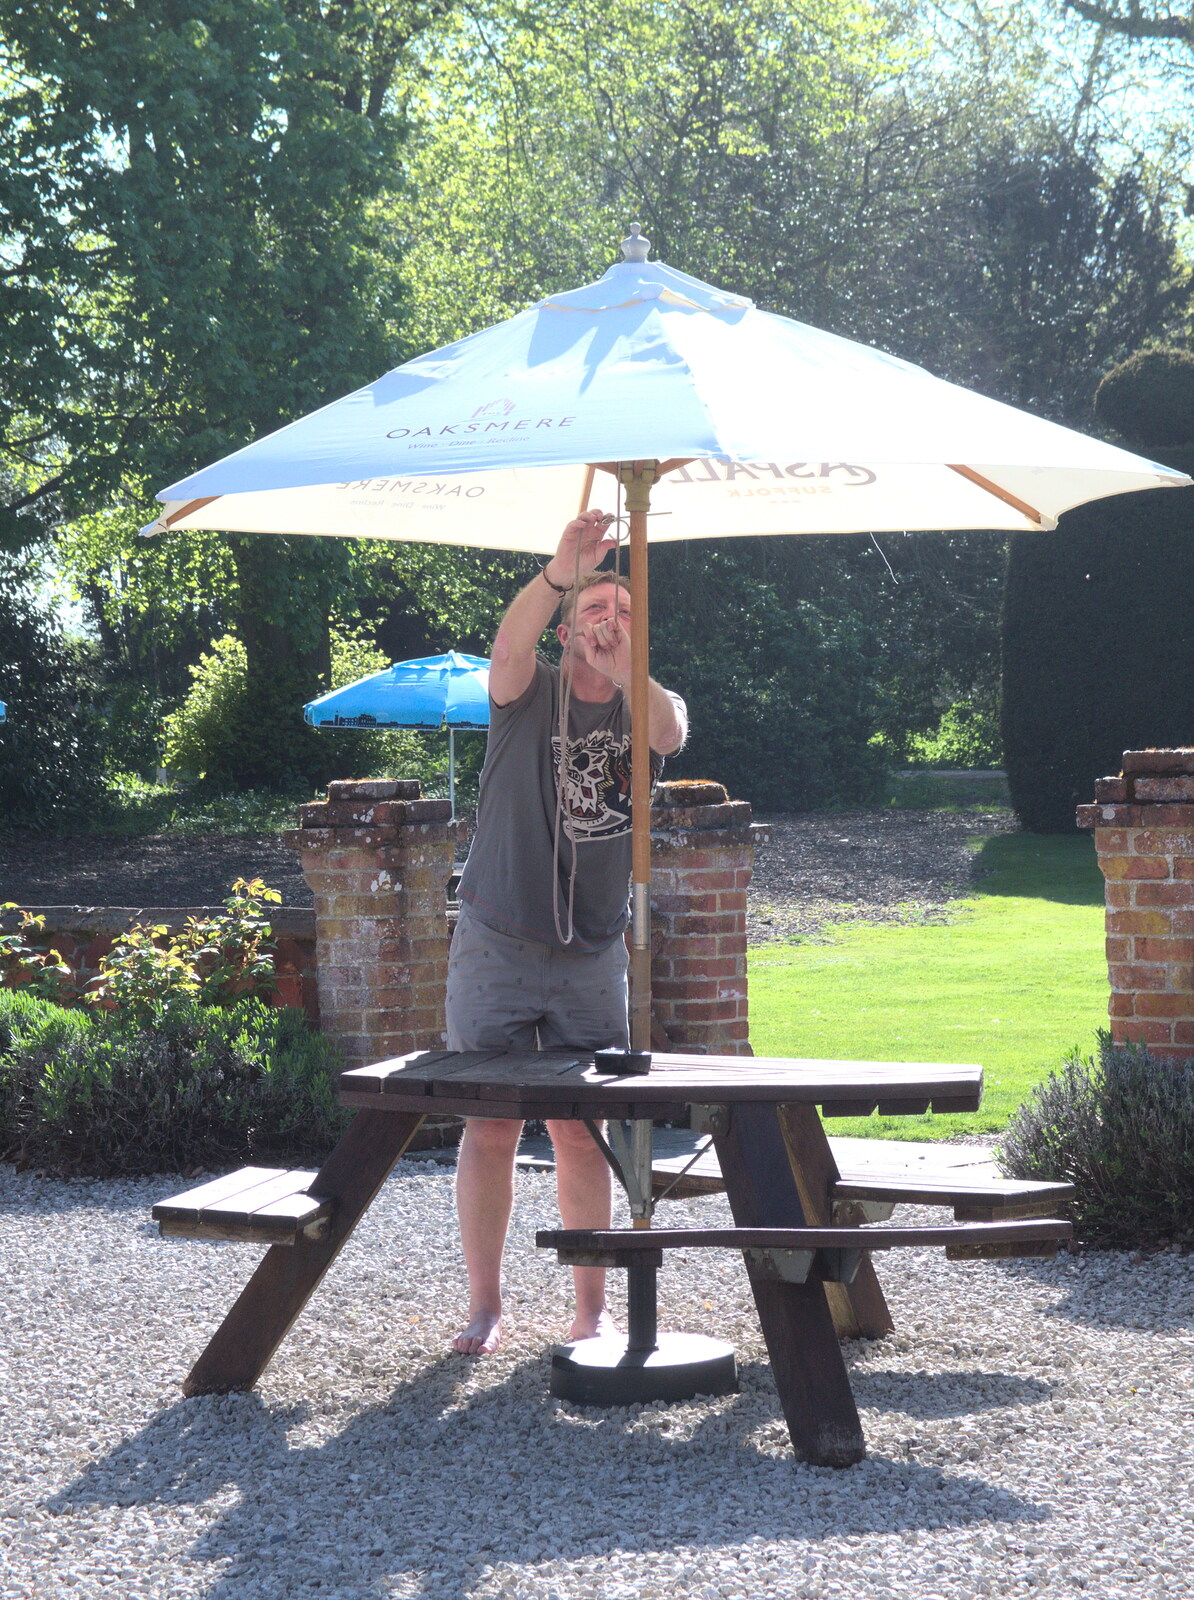 Gaz fights with a parasol at the Oaksmere from A Bike Ride to the Railway Tavern, Mellis, Suffolk - 7th May 2018